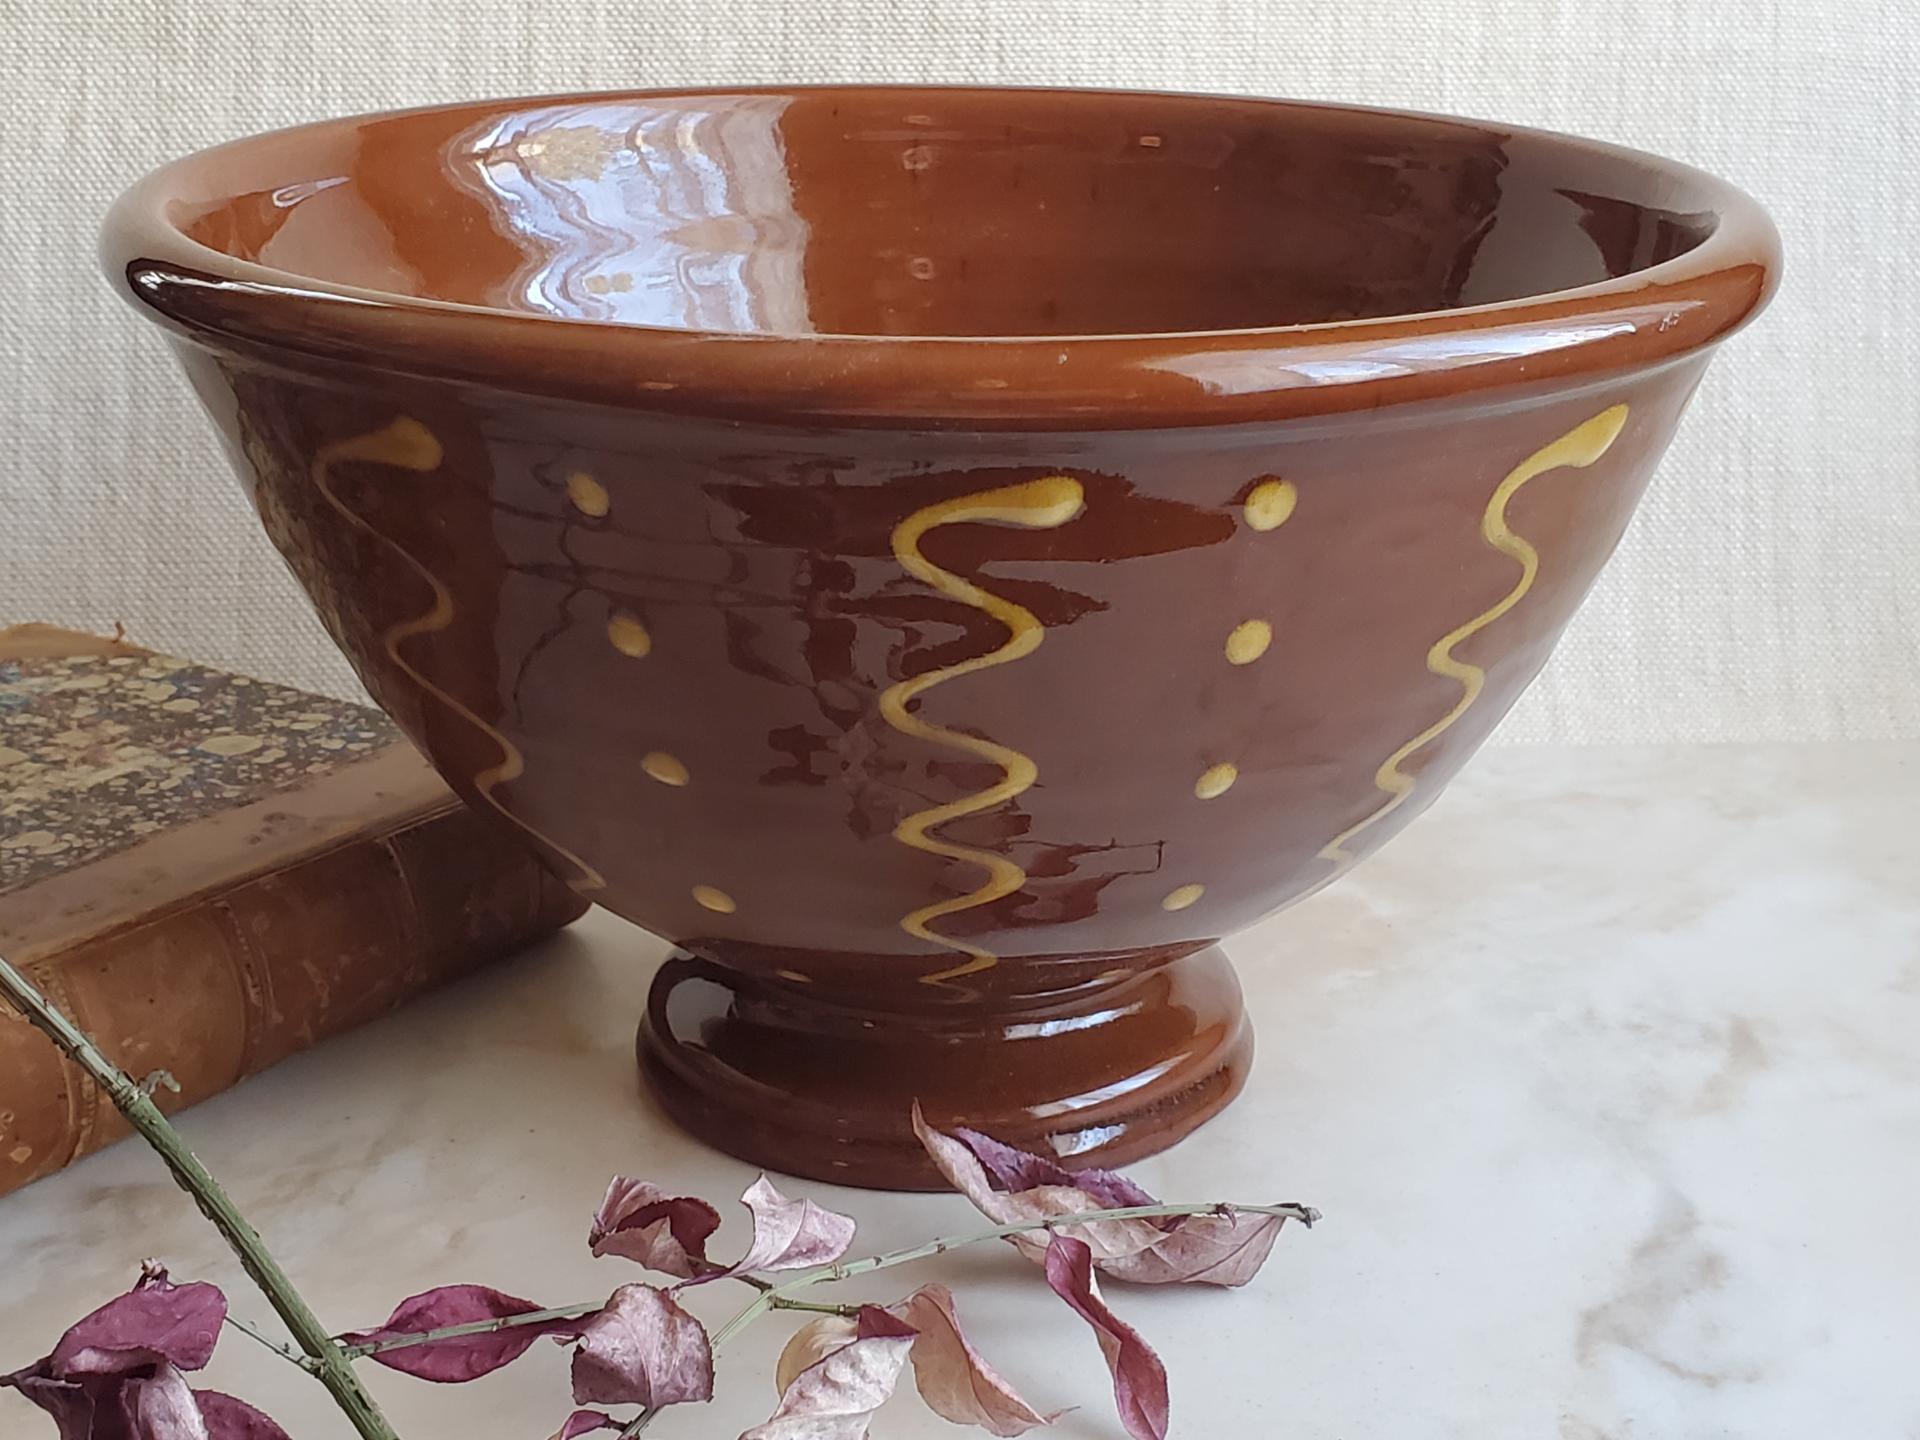 Redware Fruit Bowl with Squiggles & Dots Pattern